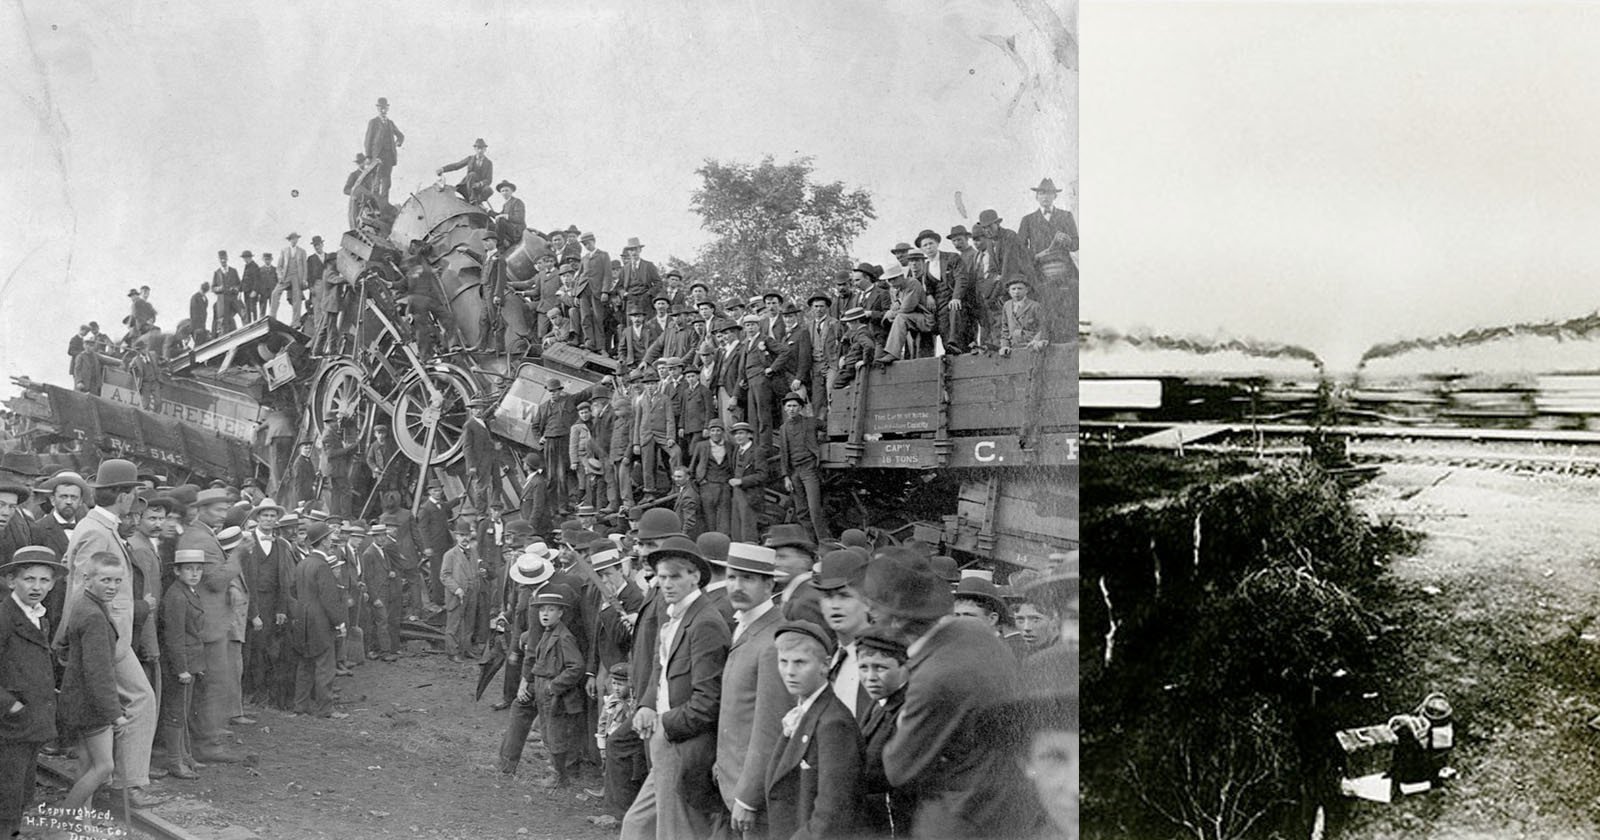  historical photos when trains were purposely crashed into 